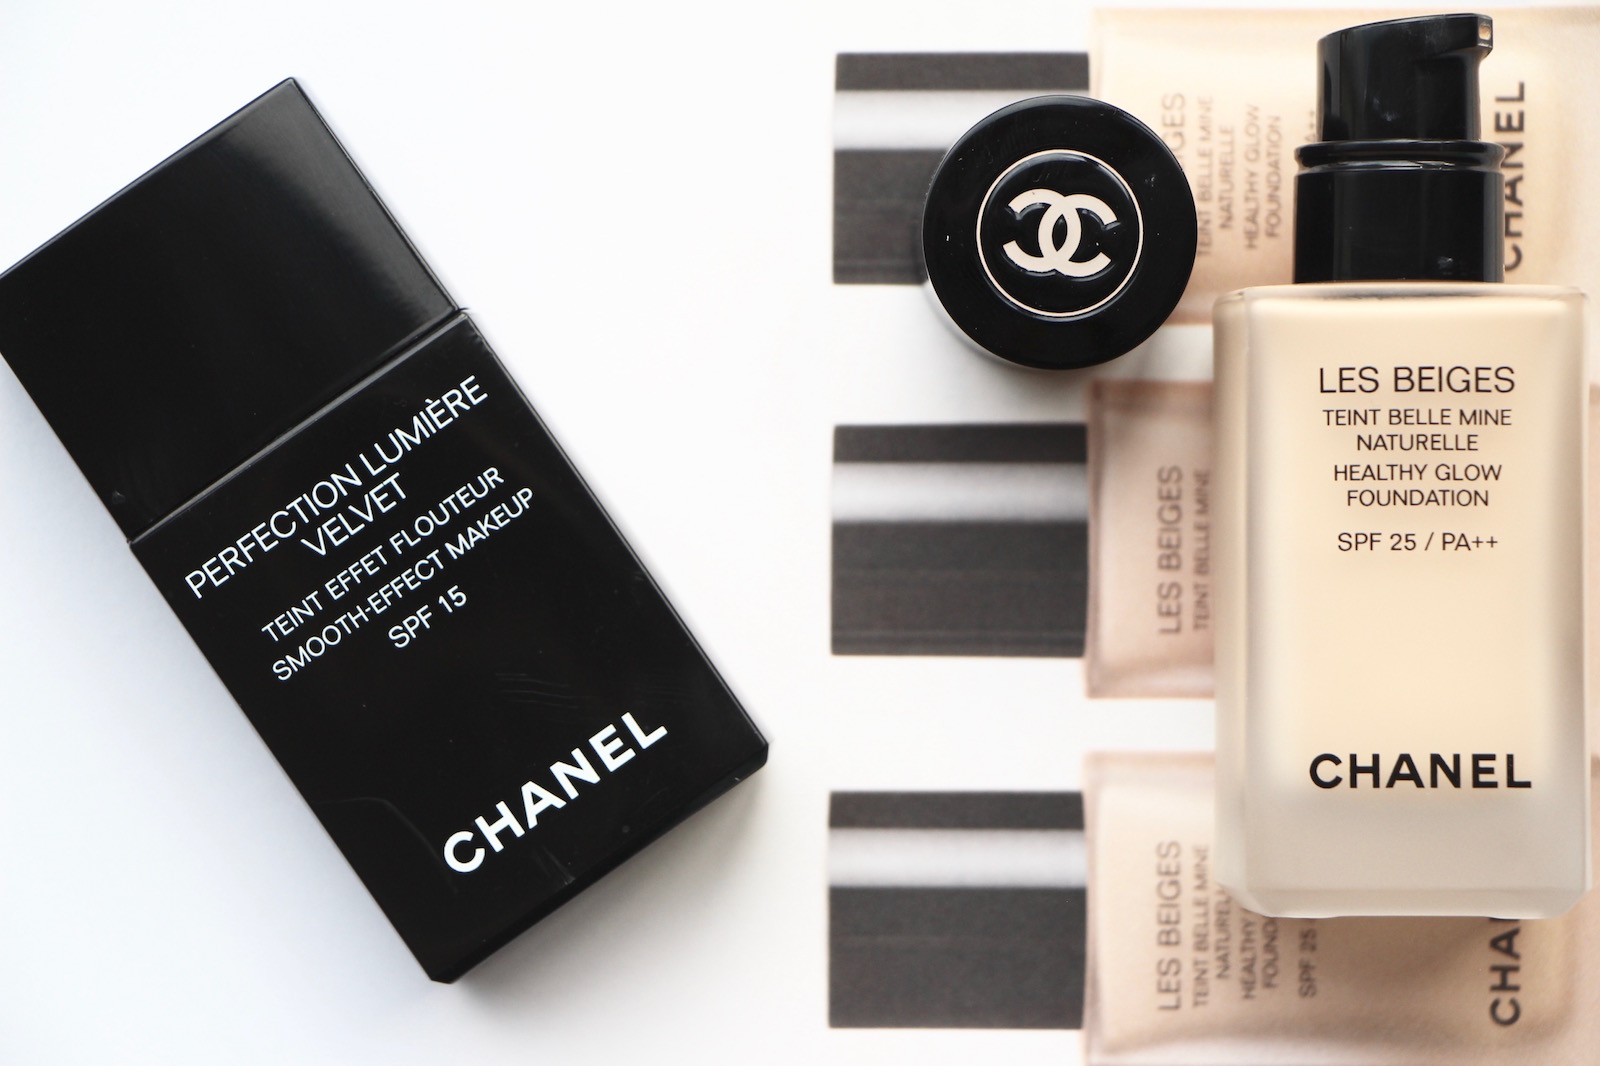 CHANEL PERFECTION LUMIÈRE VELVET SmoothEffect Makeup Broad Spectrum SPF 15  Sunscreen  Bloomingdales